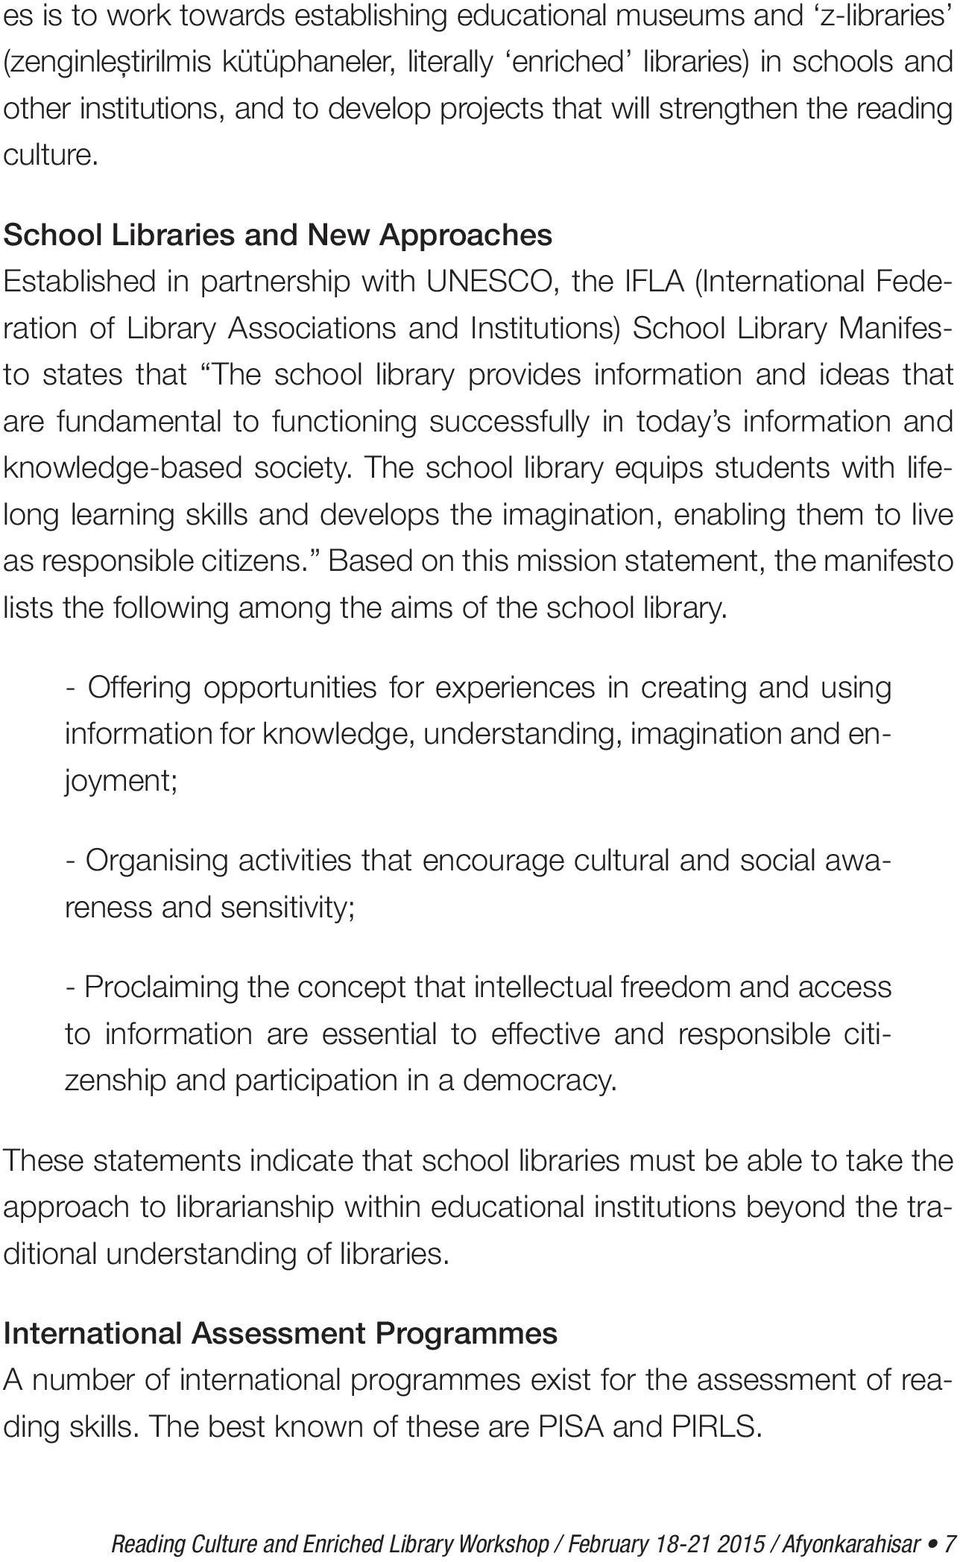 School Libraries and New Approaches Established in partnership with UNESCO, the IFLA (International Federation of Library Associations and Institutions) School Library Manifesto states that The